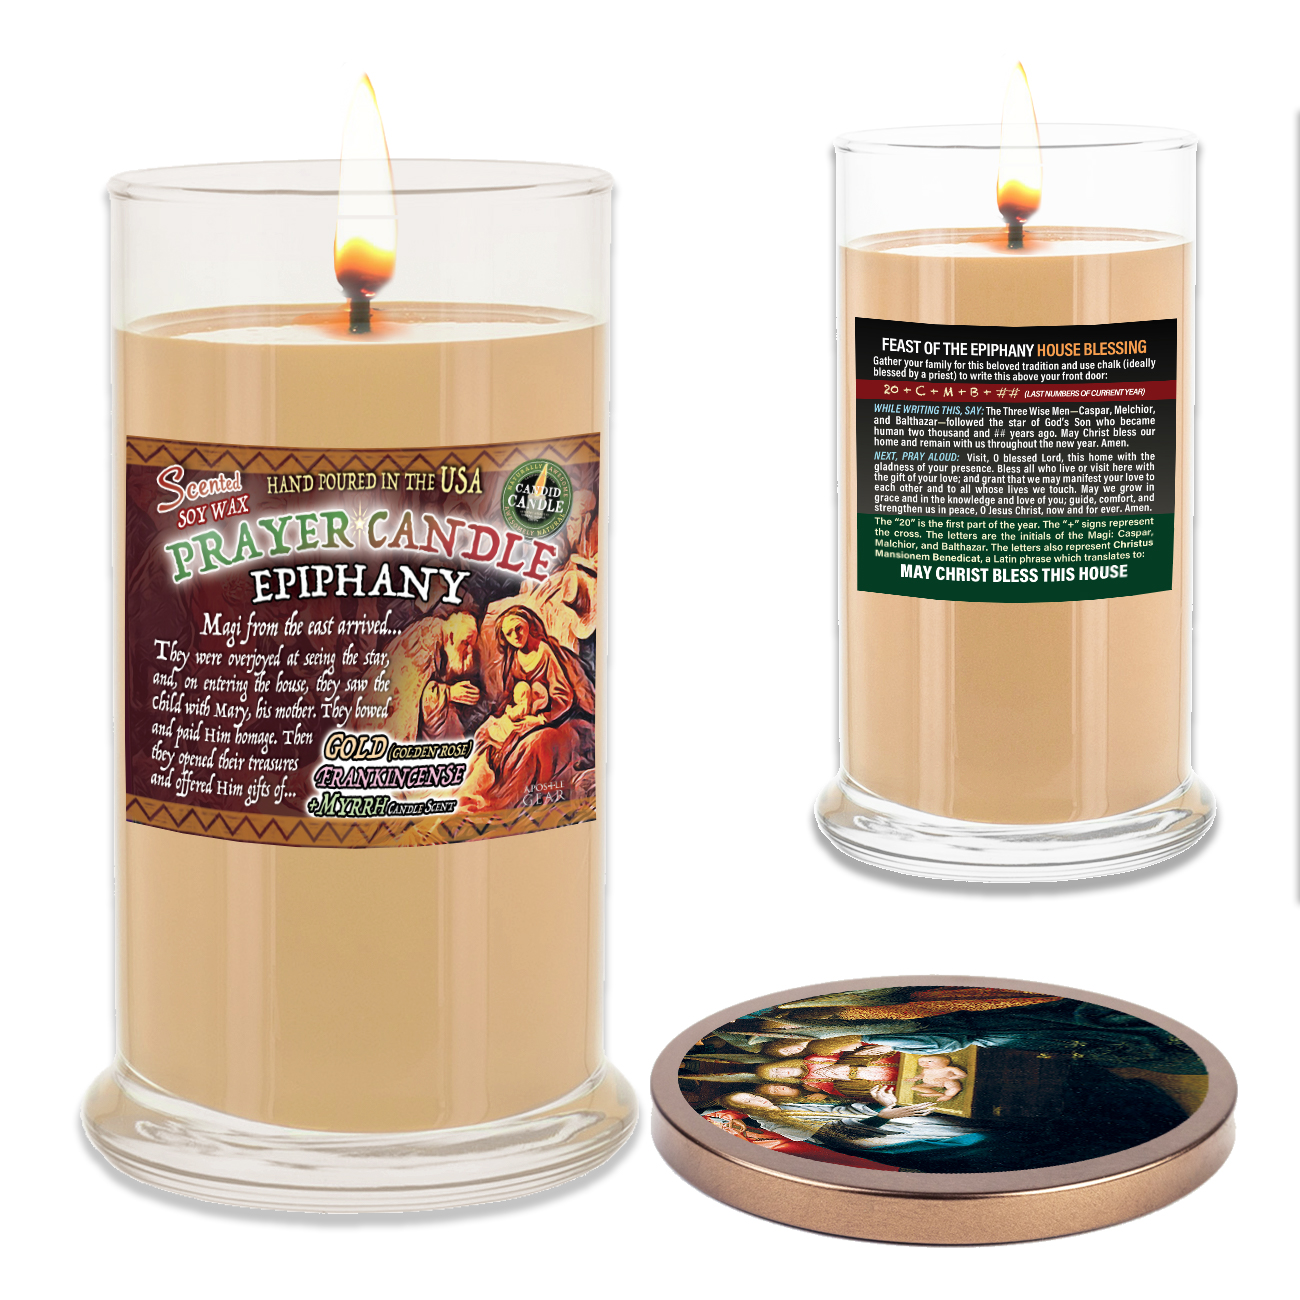 Scented Prayer Candle for Epiphany